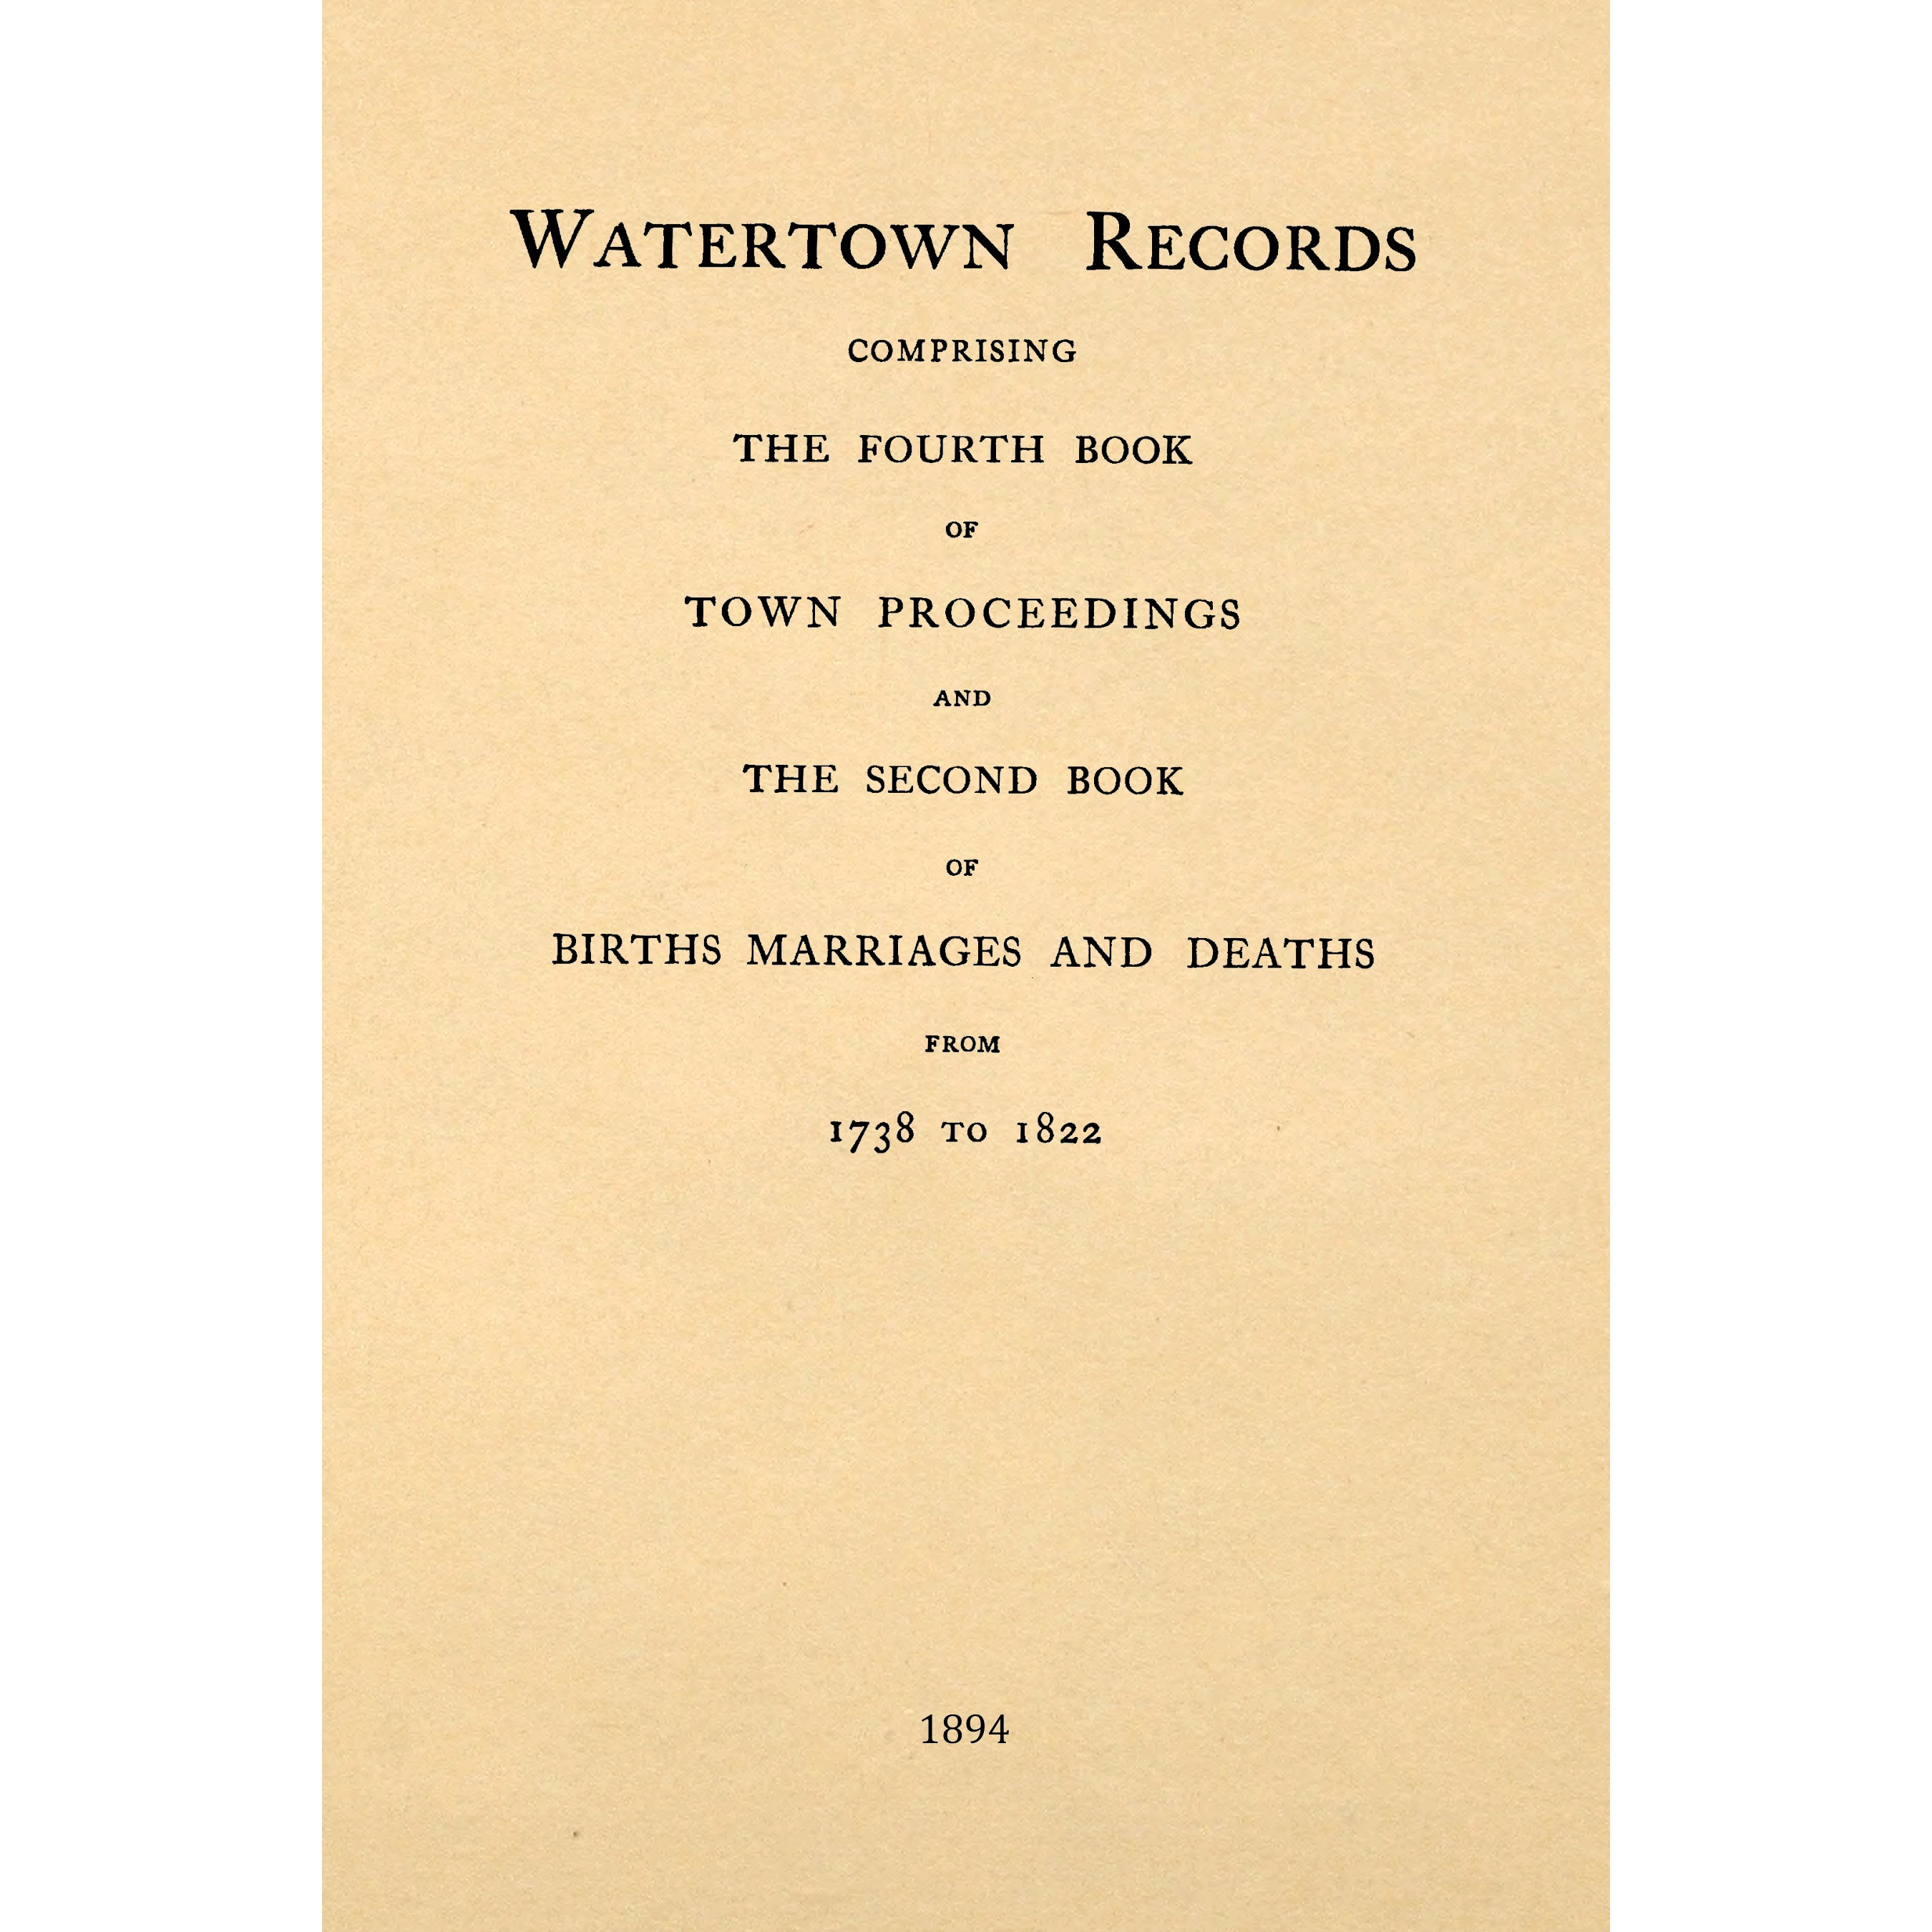 Watertown records